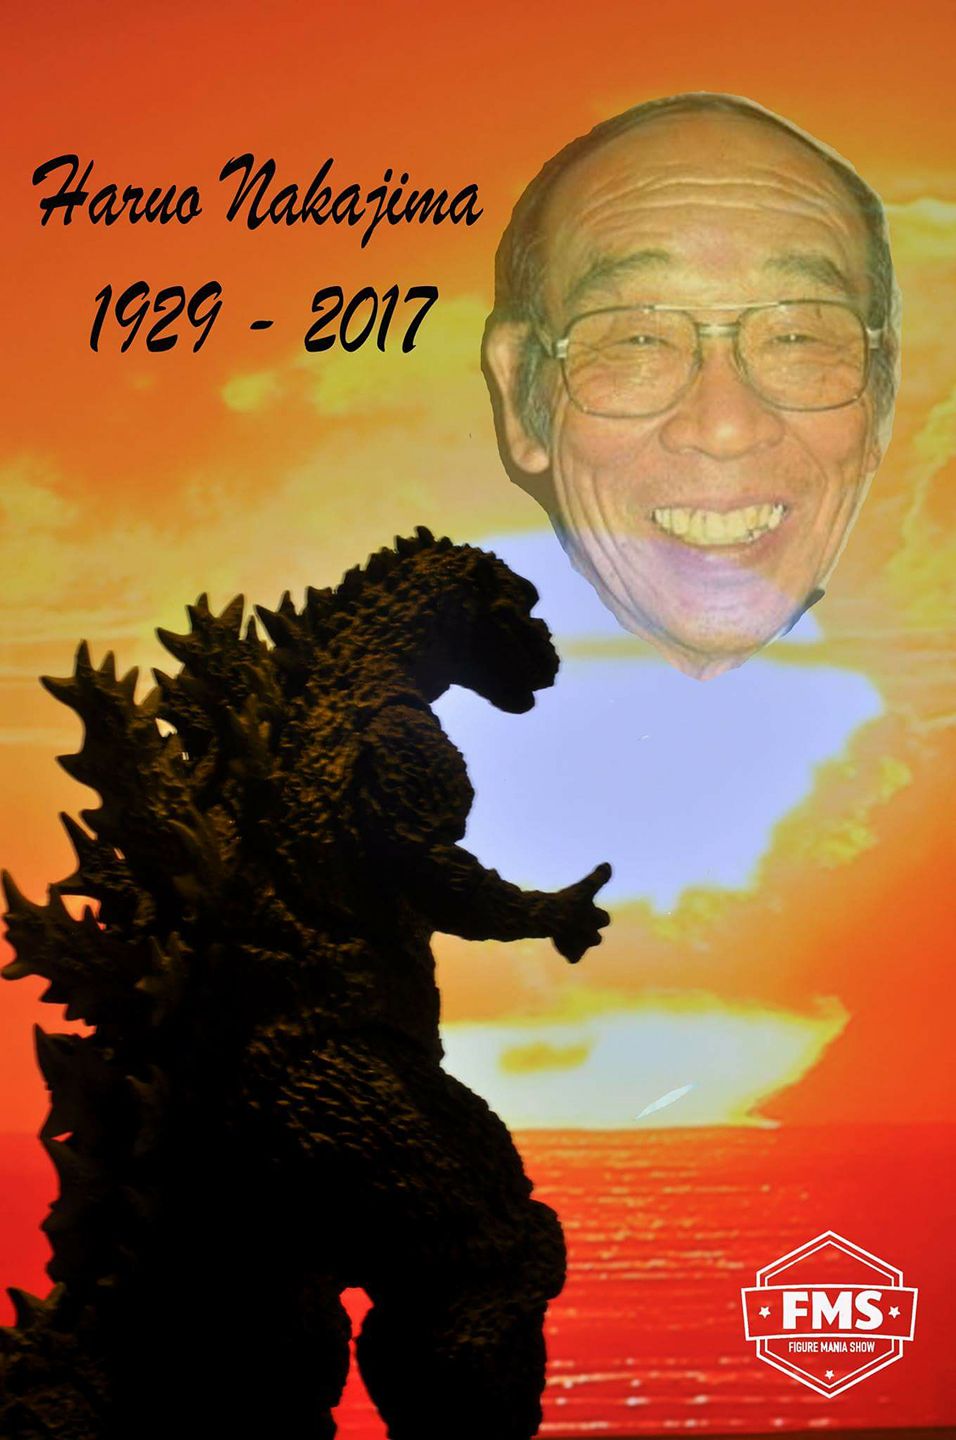 Tribute to Haruo Nakajima. Always be loved and remembered.